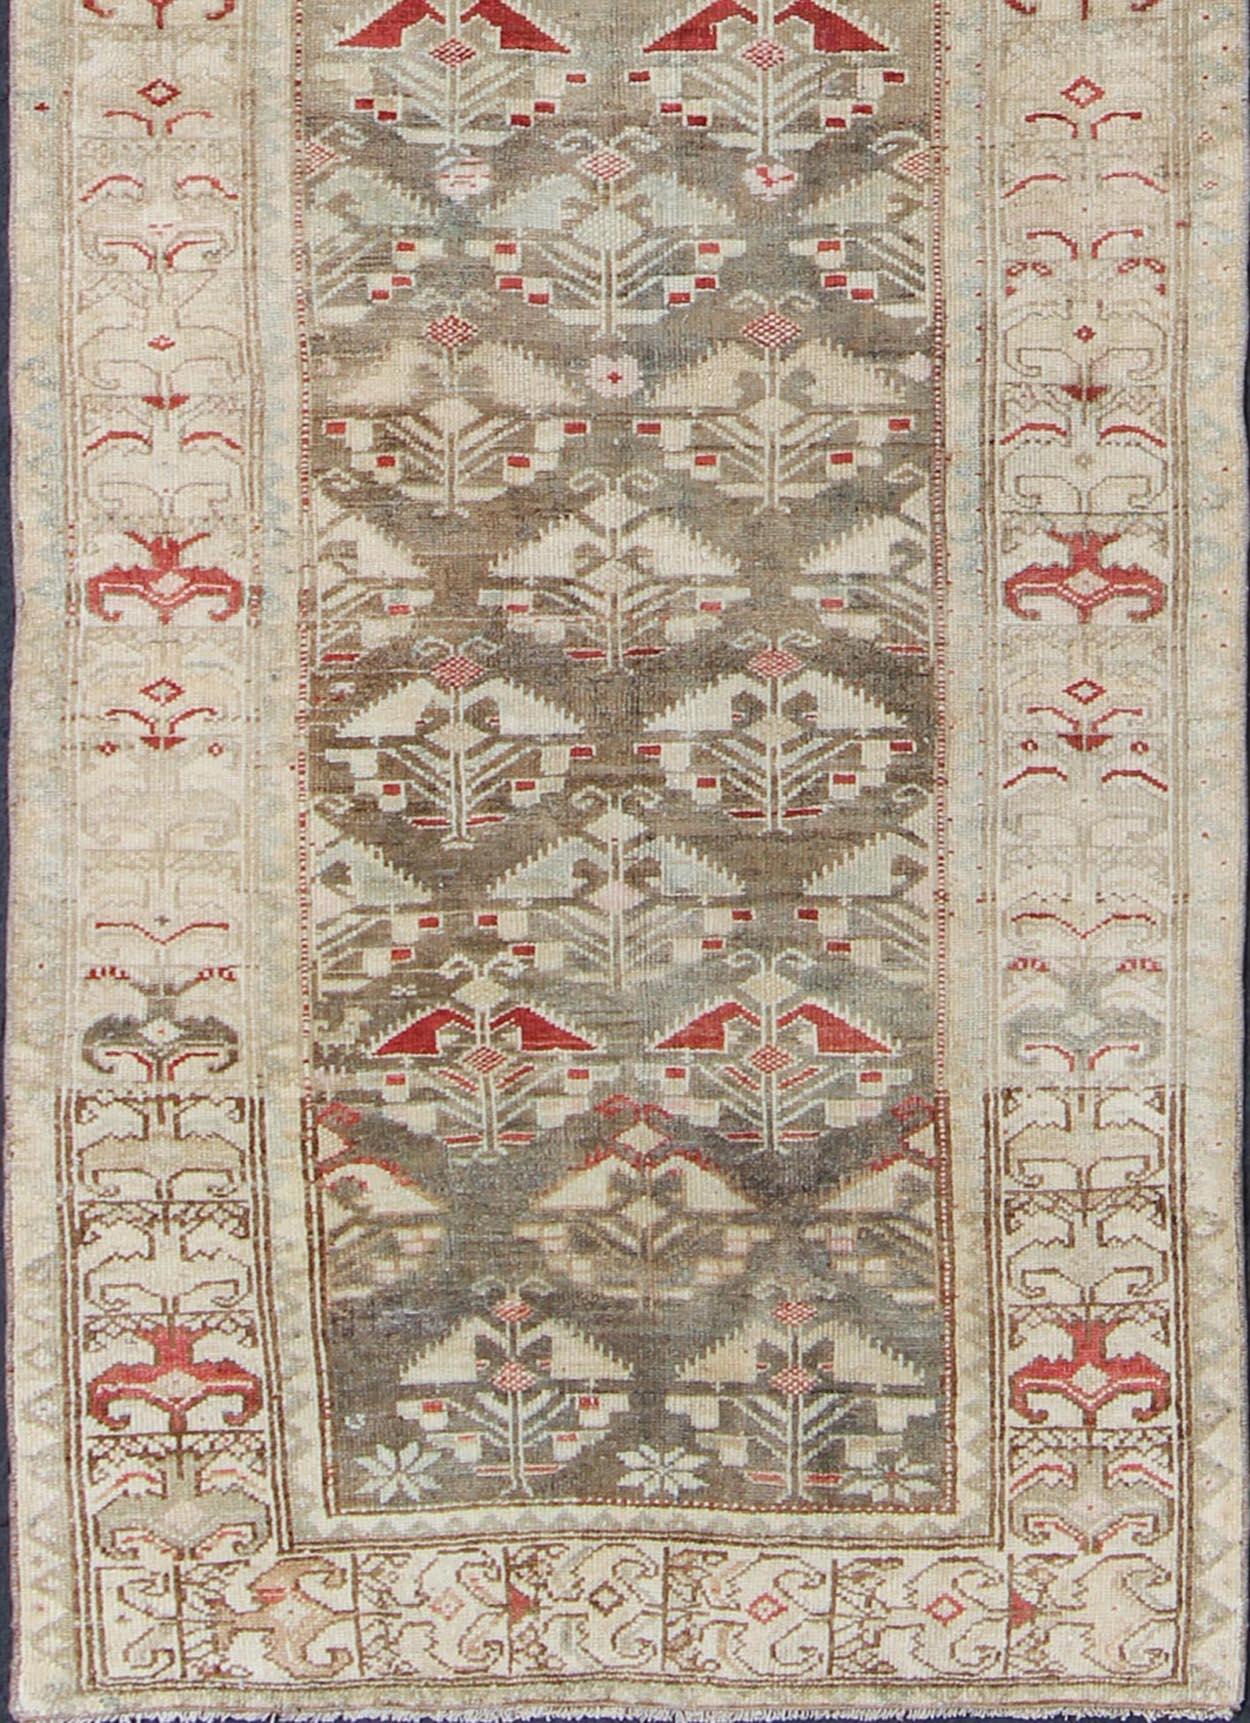 Gray green, charcoal, red, gray, runner from Persia vintage Kurdish with all-over repeating geometric design and neutral colors, kwarugs / ema-7518, country of origin / type: Iran / Kurdish, circa 1930.

This vintage Kurdish tribal rug was woven